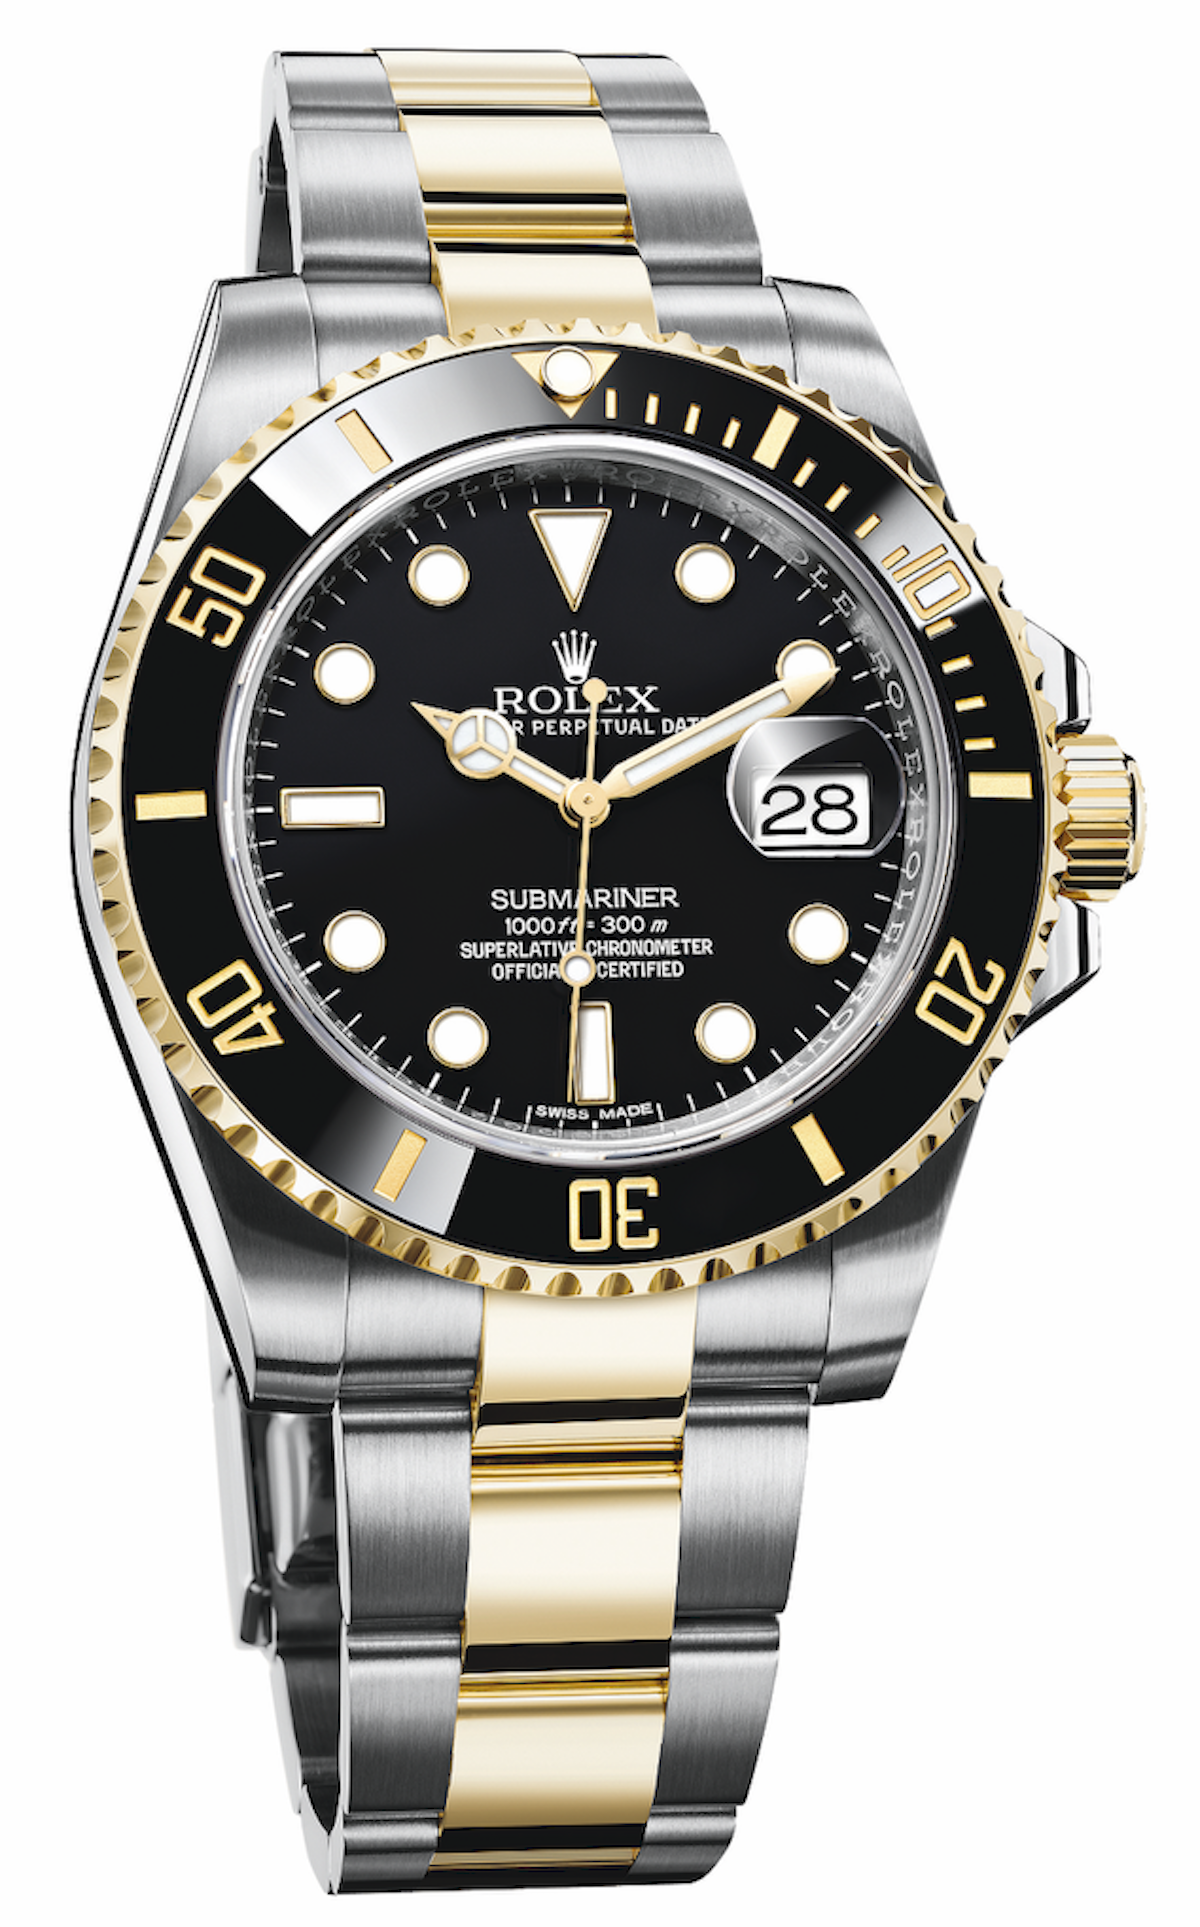 Rolex Submariner Review A Dive Watch for Everyday Living